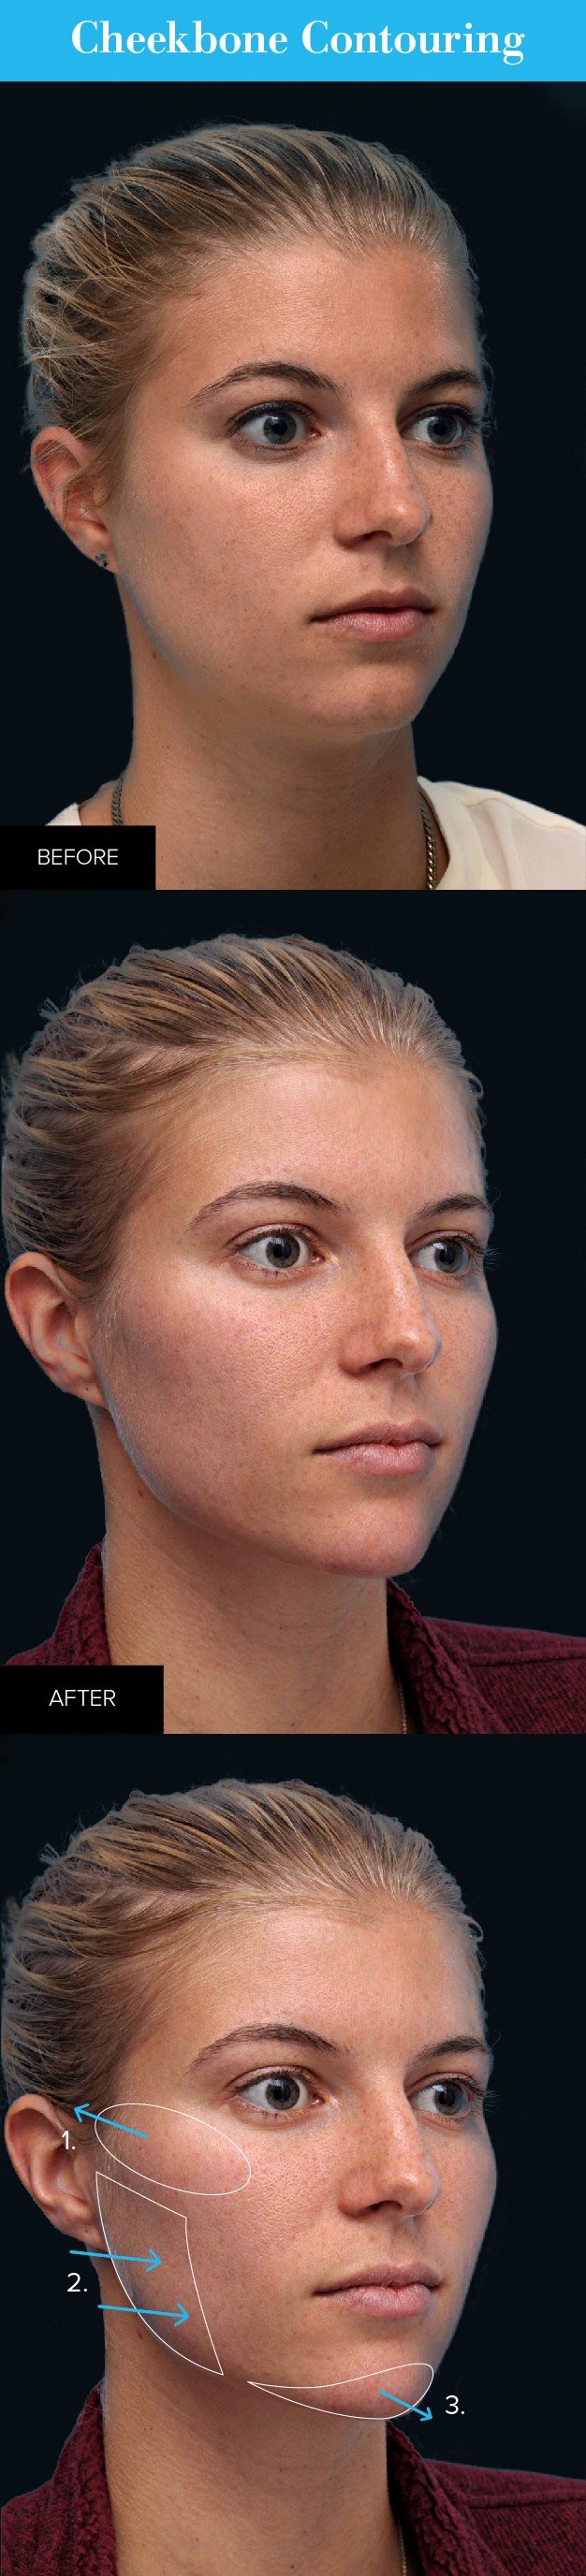 before and after infographic of cheekbone contouring